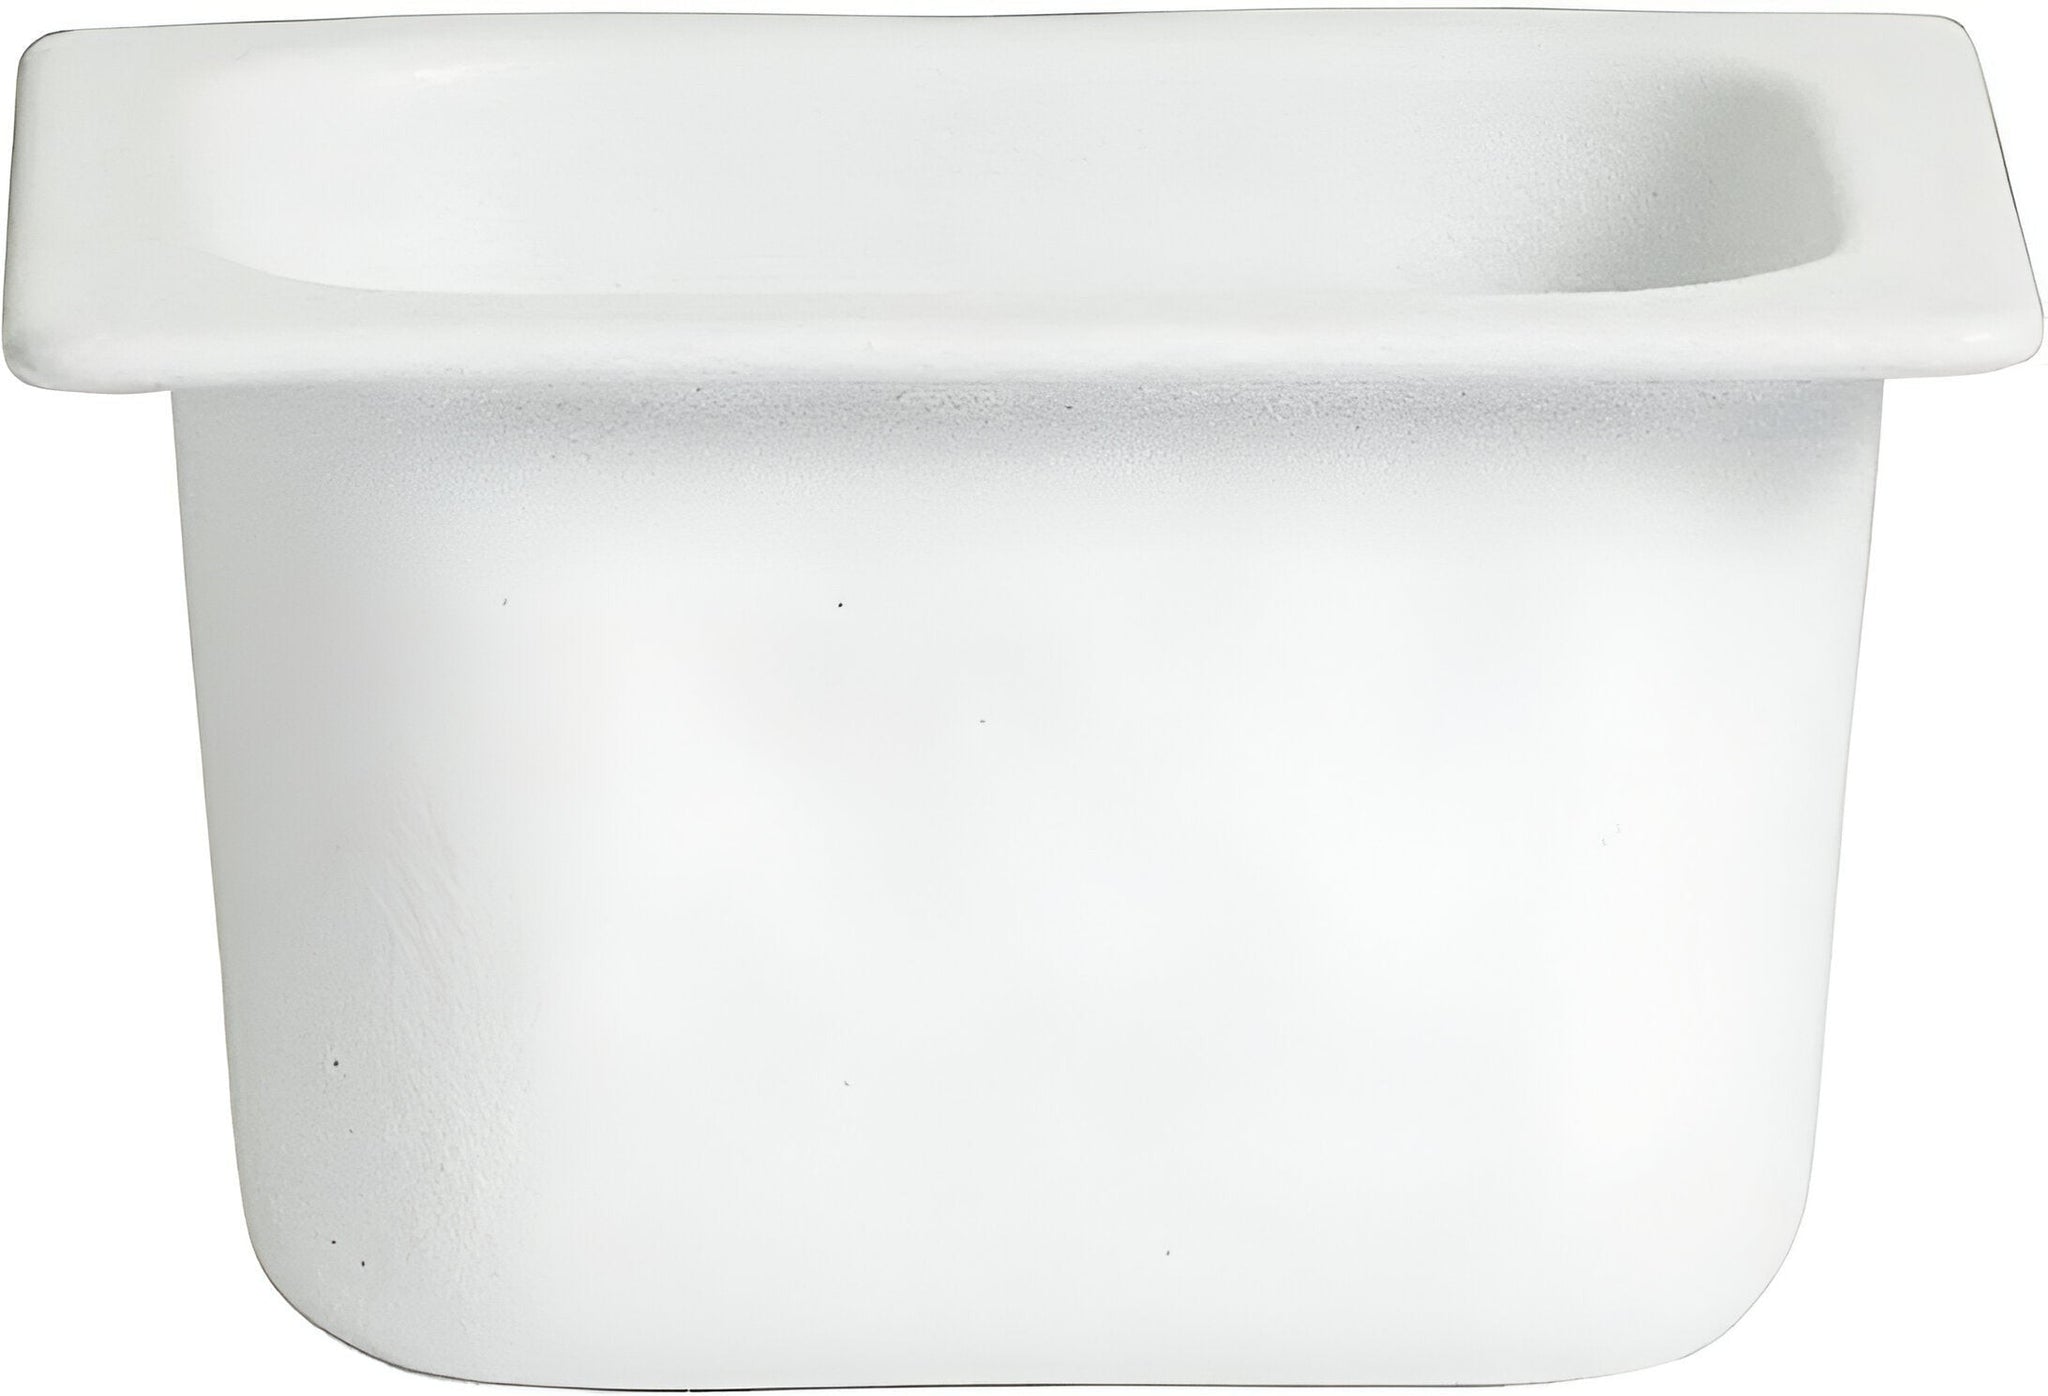 Bugambilia - Classic 1.6 Qt White Rectangular Sixth Size Deep Food Pan With Elegantly Textured - IH1/6DWW